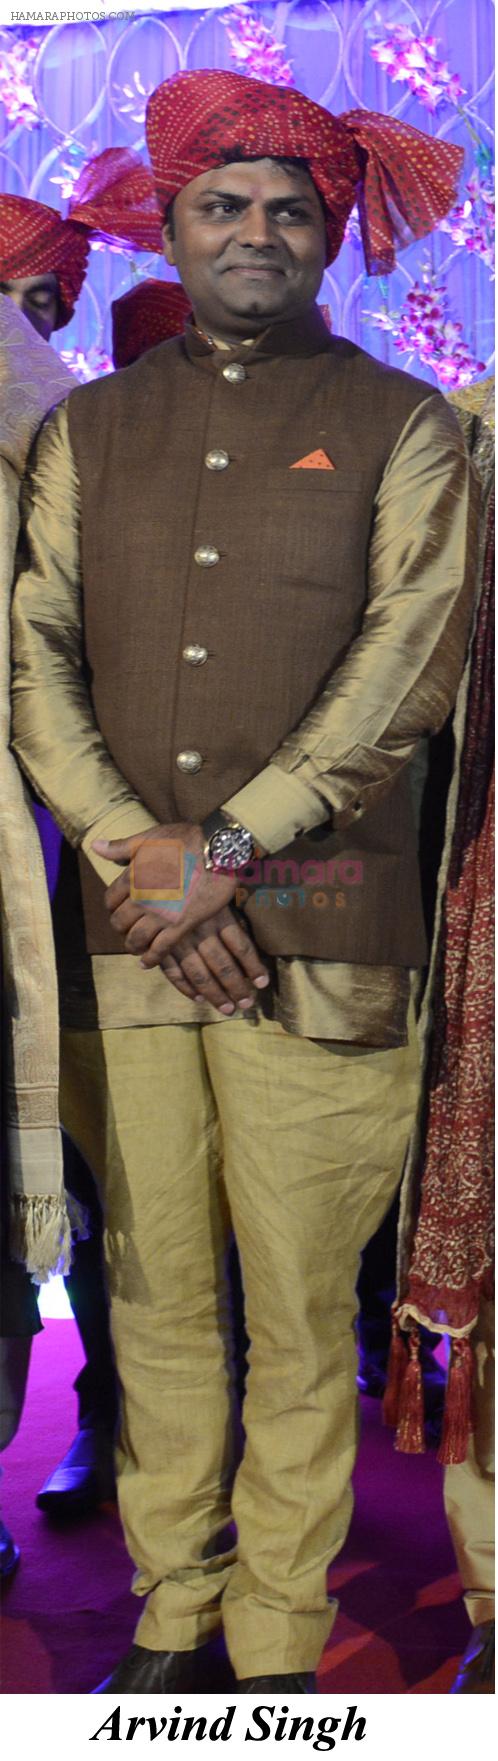 Arvind Singh at the Reception of Jai Singh and Shradha Singh on 7th May 2013